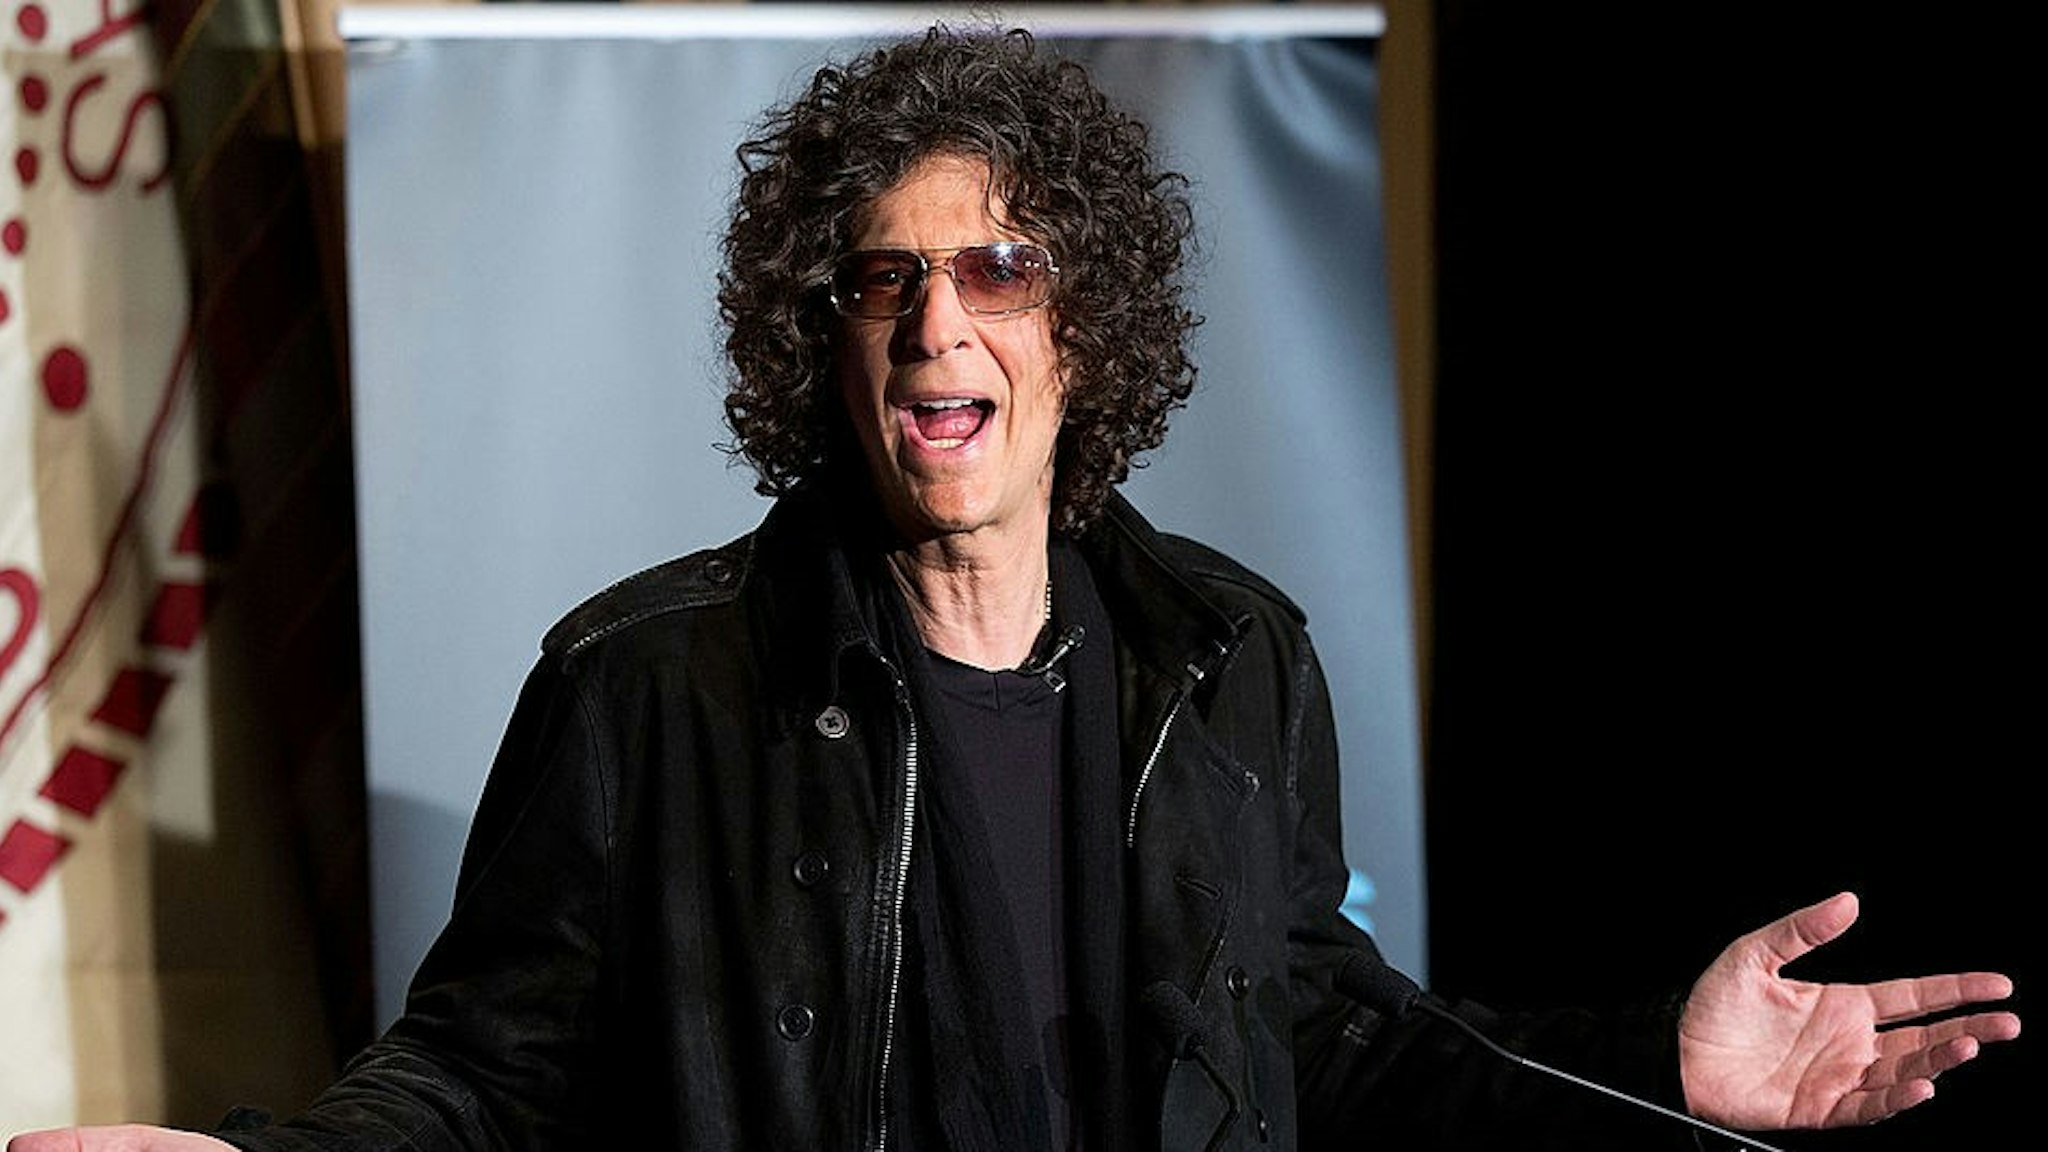 NEW YORK, NY - MAY 10: Howard Stern attends the "America's Got Talent" Press Conference at New York Friars Club on May 10, 2012 in New York City. (Photo by